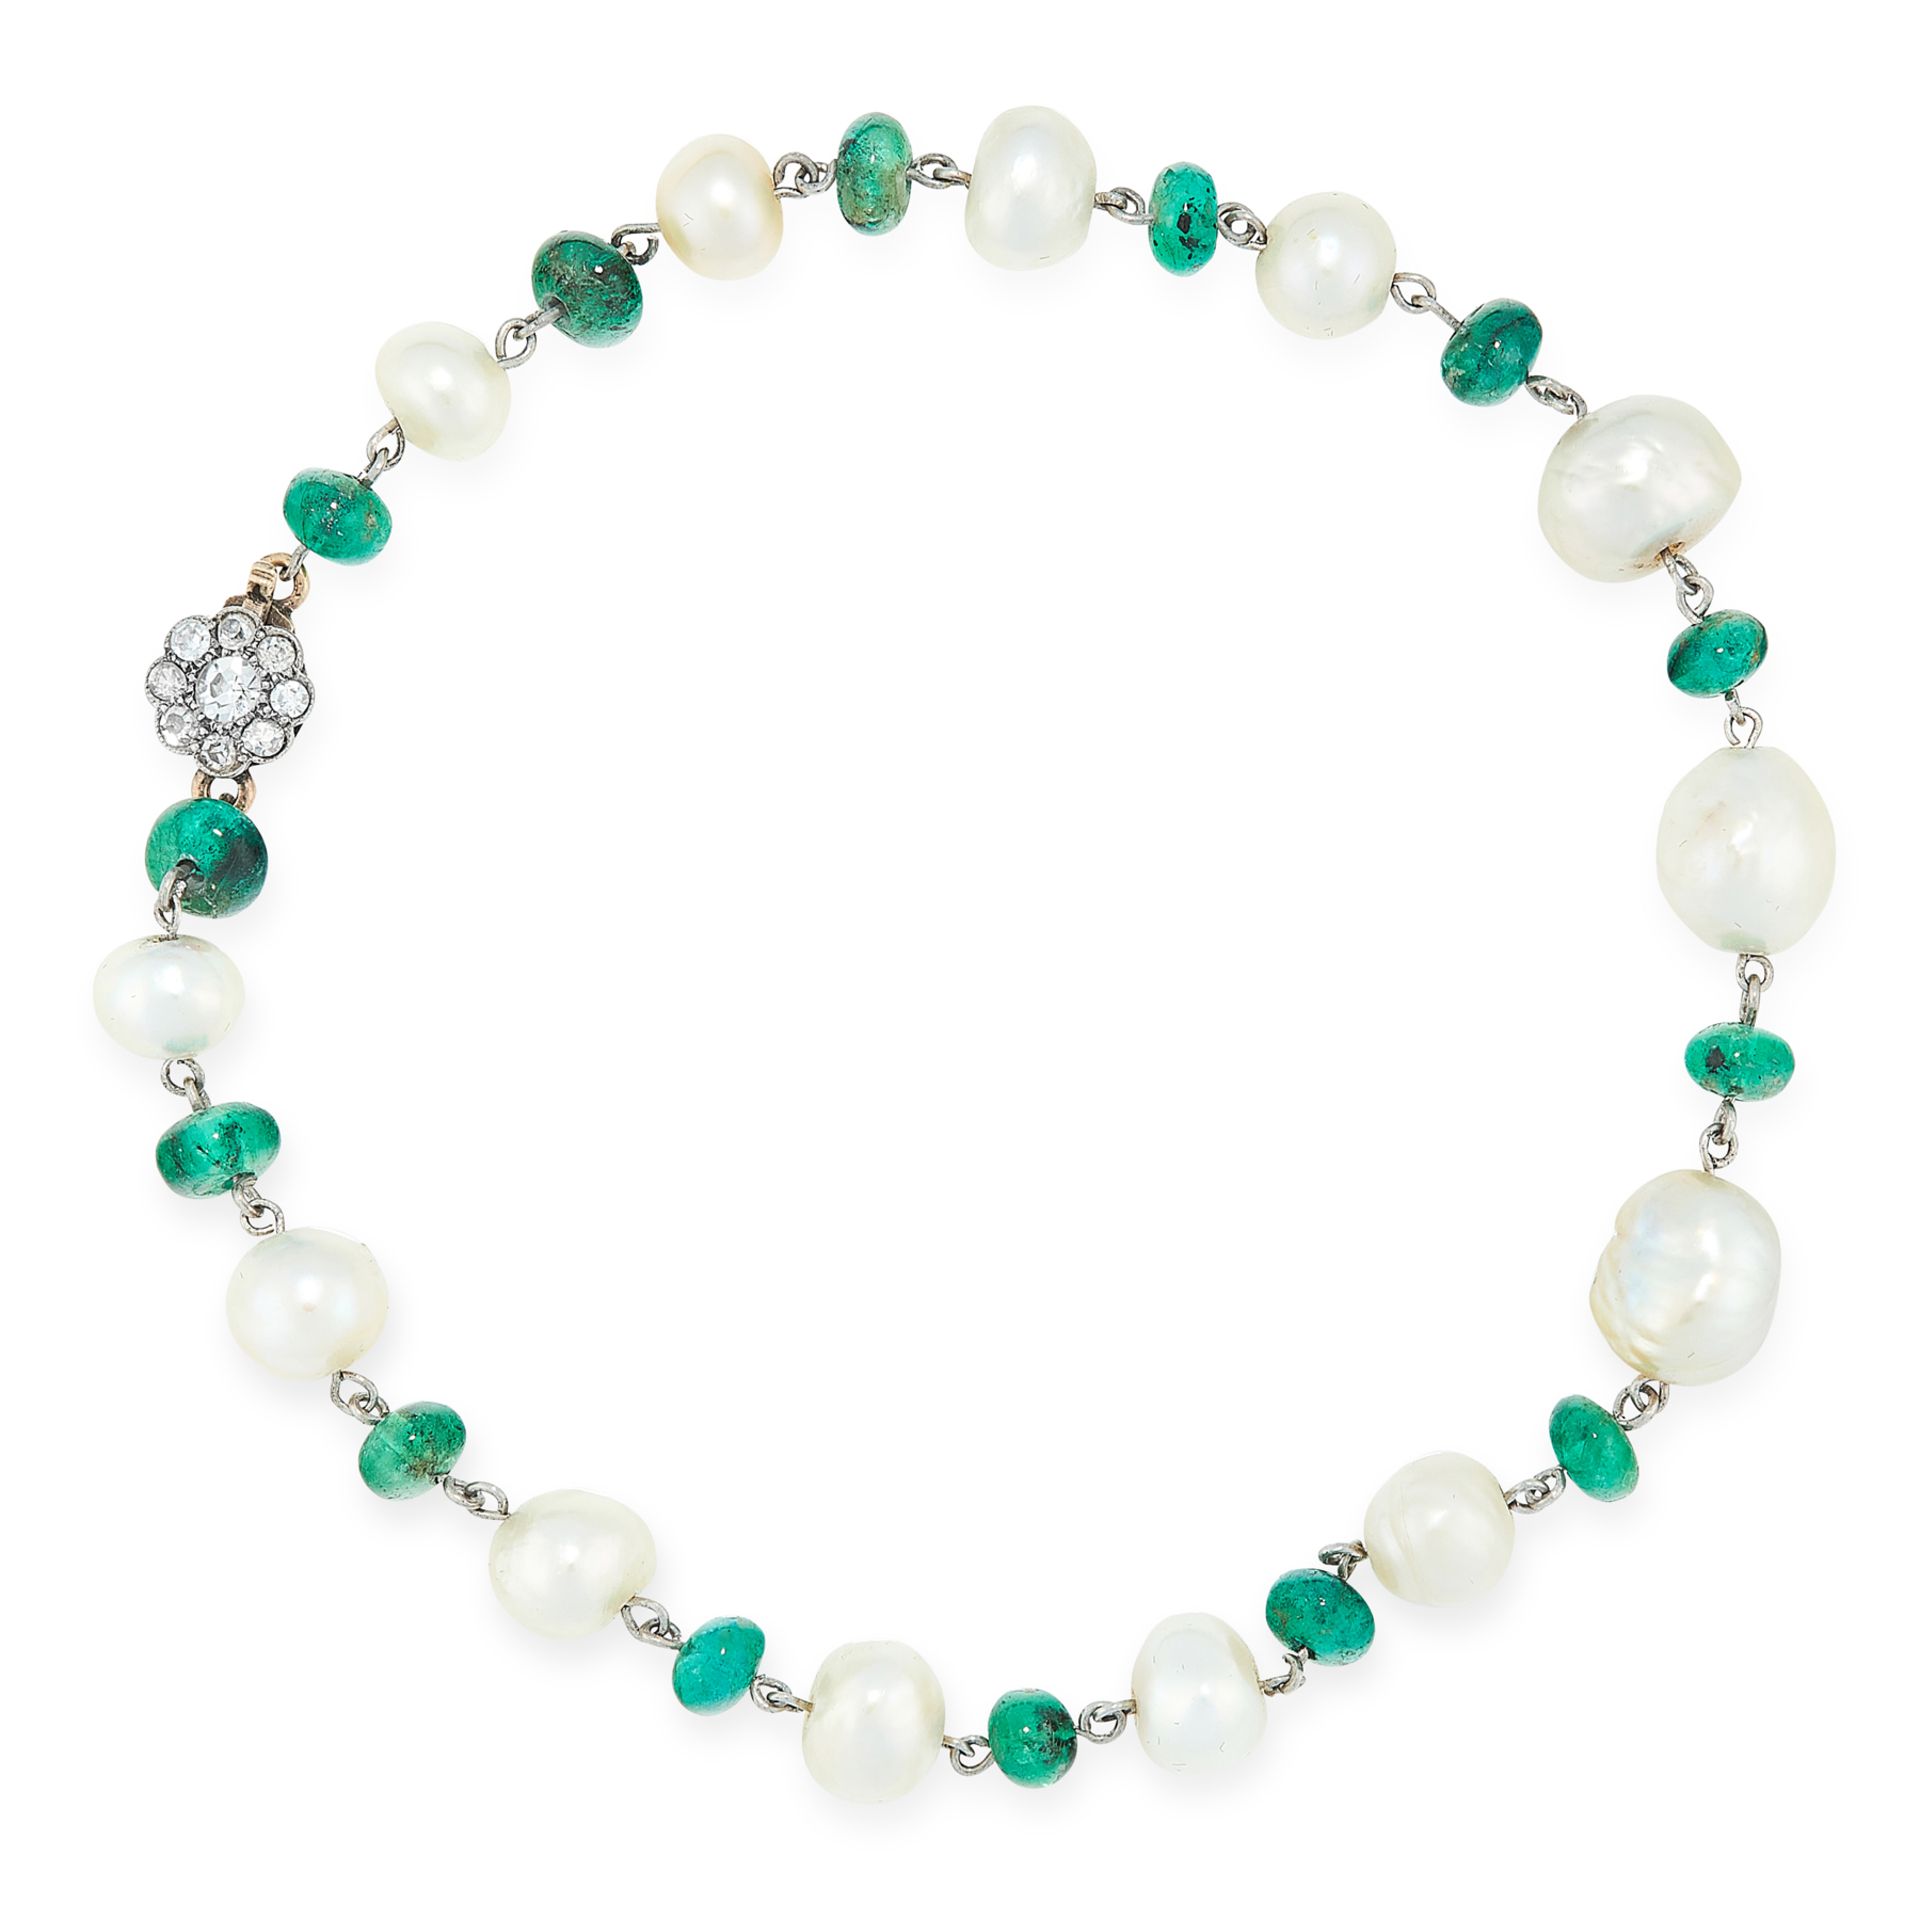 A NATURAL PEARL, EMERALD AND DIAMOND BRACELET in yellow gold and silver, comprising a row of